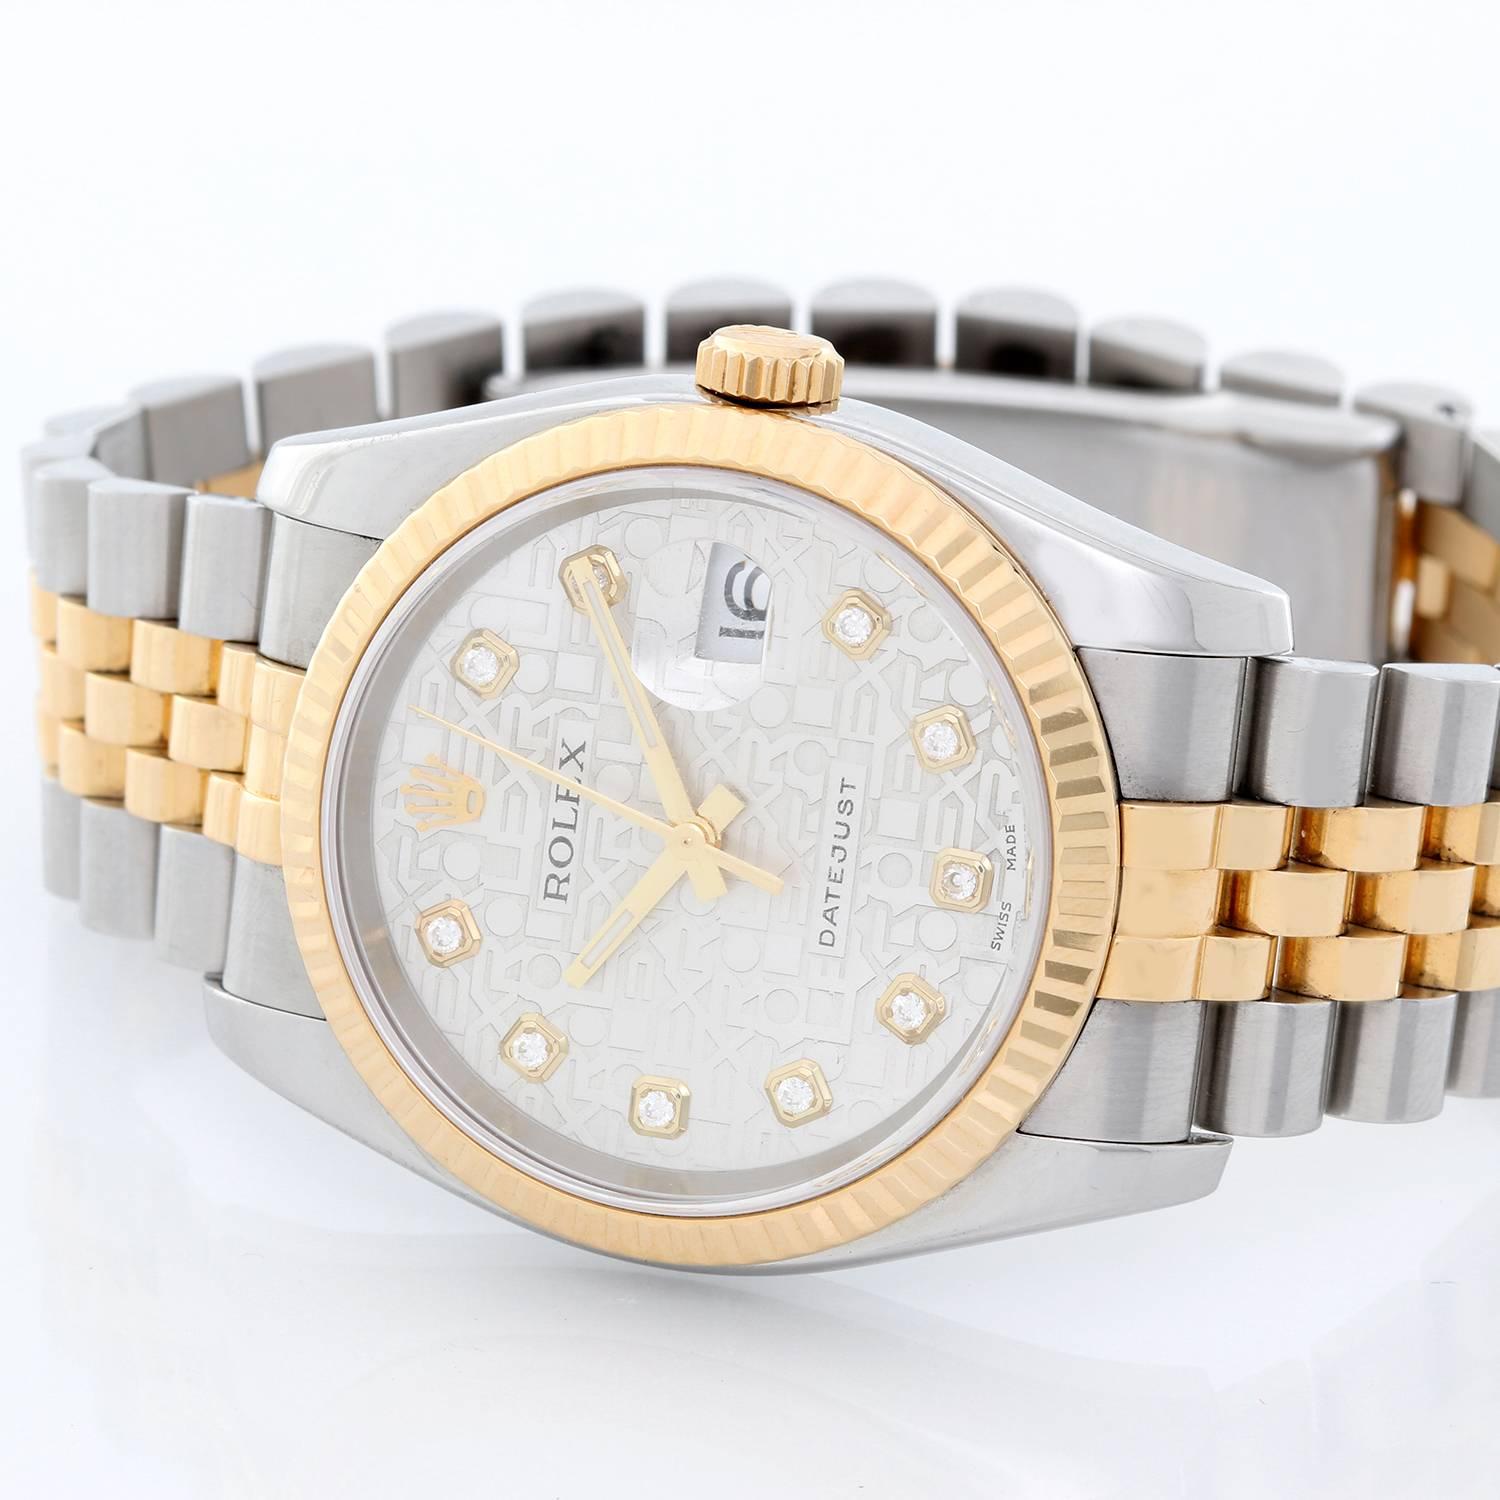 Rolex Datejust Men's 2-Tone Watch 116233 -  Automatic winding, 31 jewels, Quickset, sapphire crystal. Stainless steel case with 18k yellow gold fluted bezel  (36mm diameter). Custom silver Jubilee diamond dial. Stainless steel and 18k yellow gold